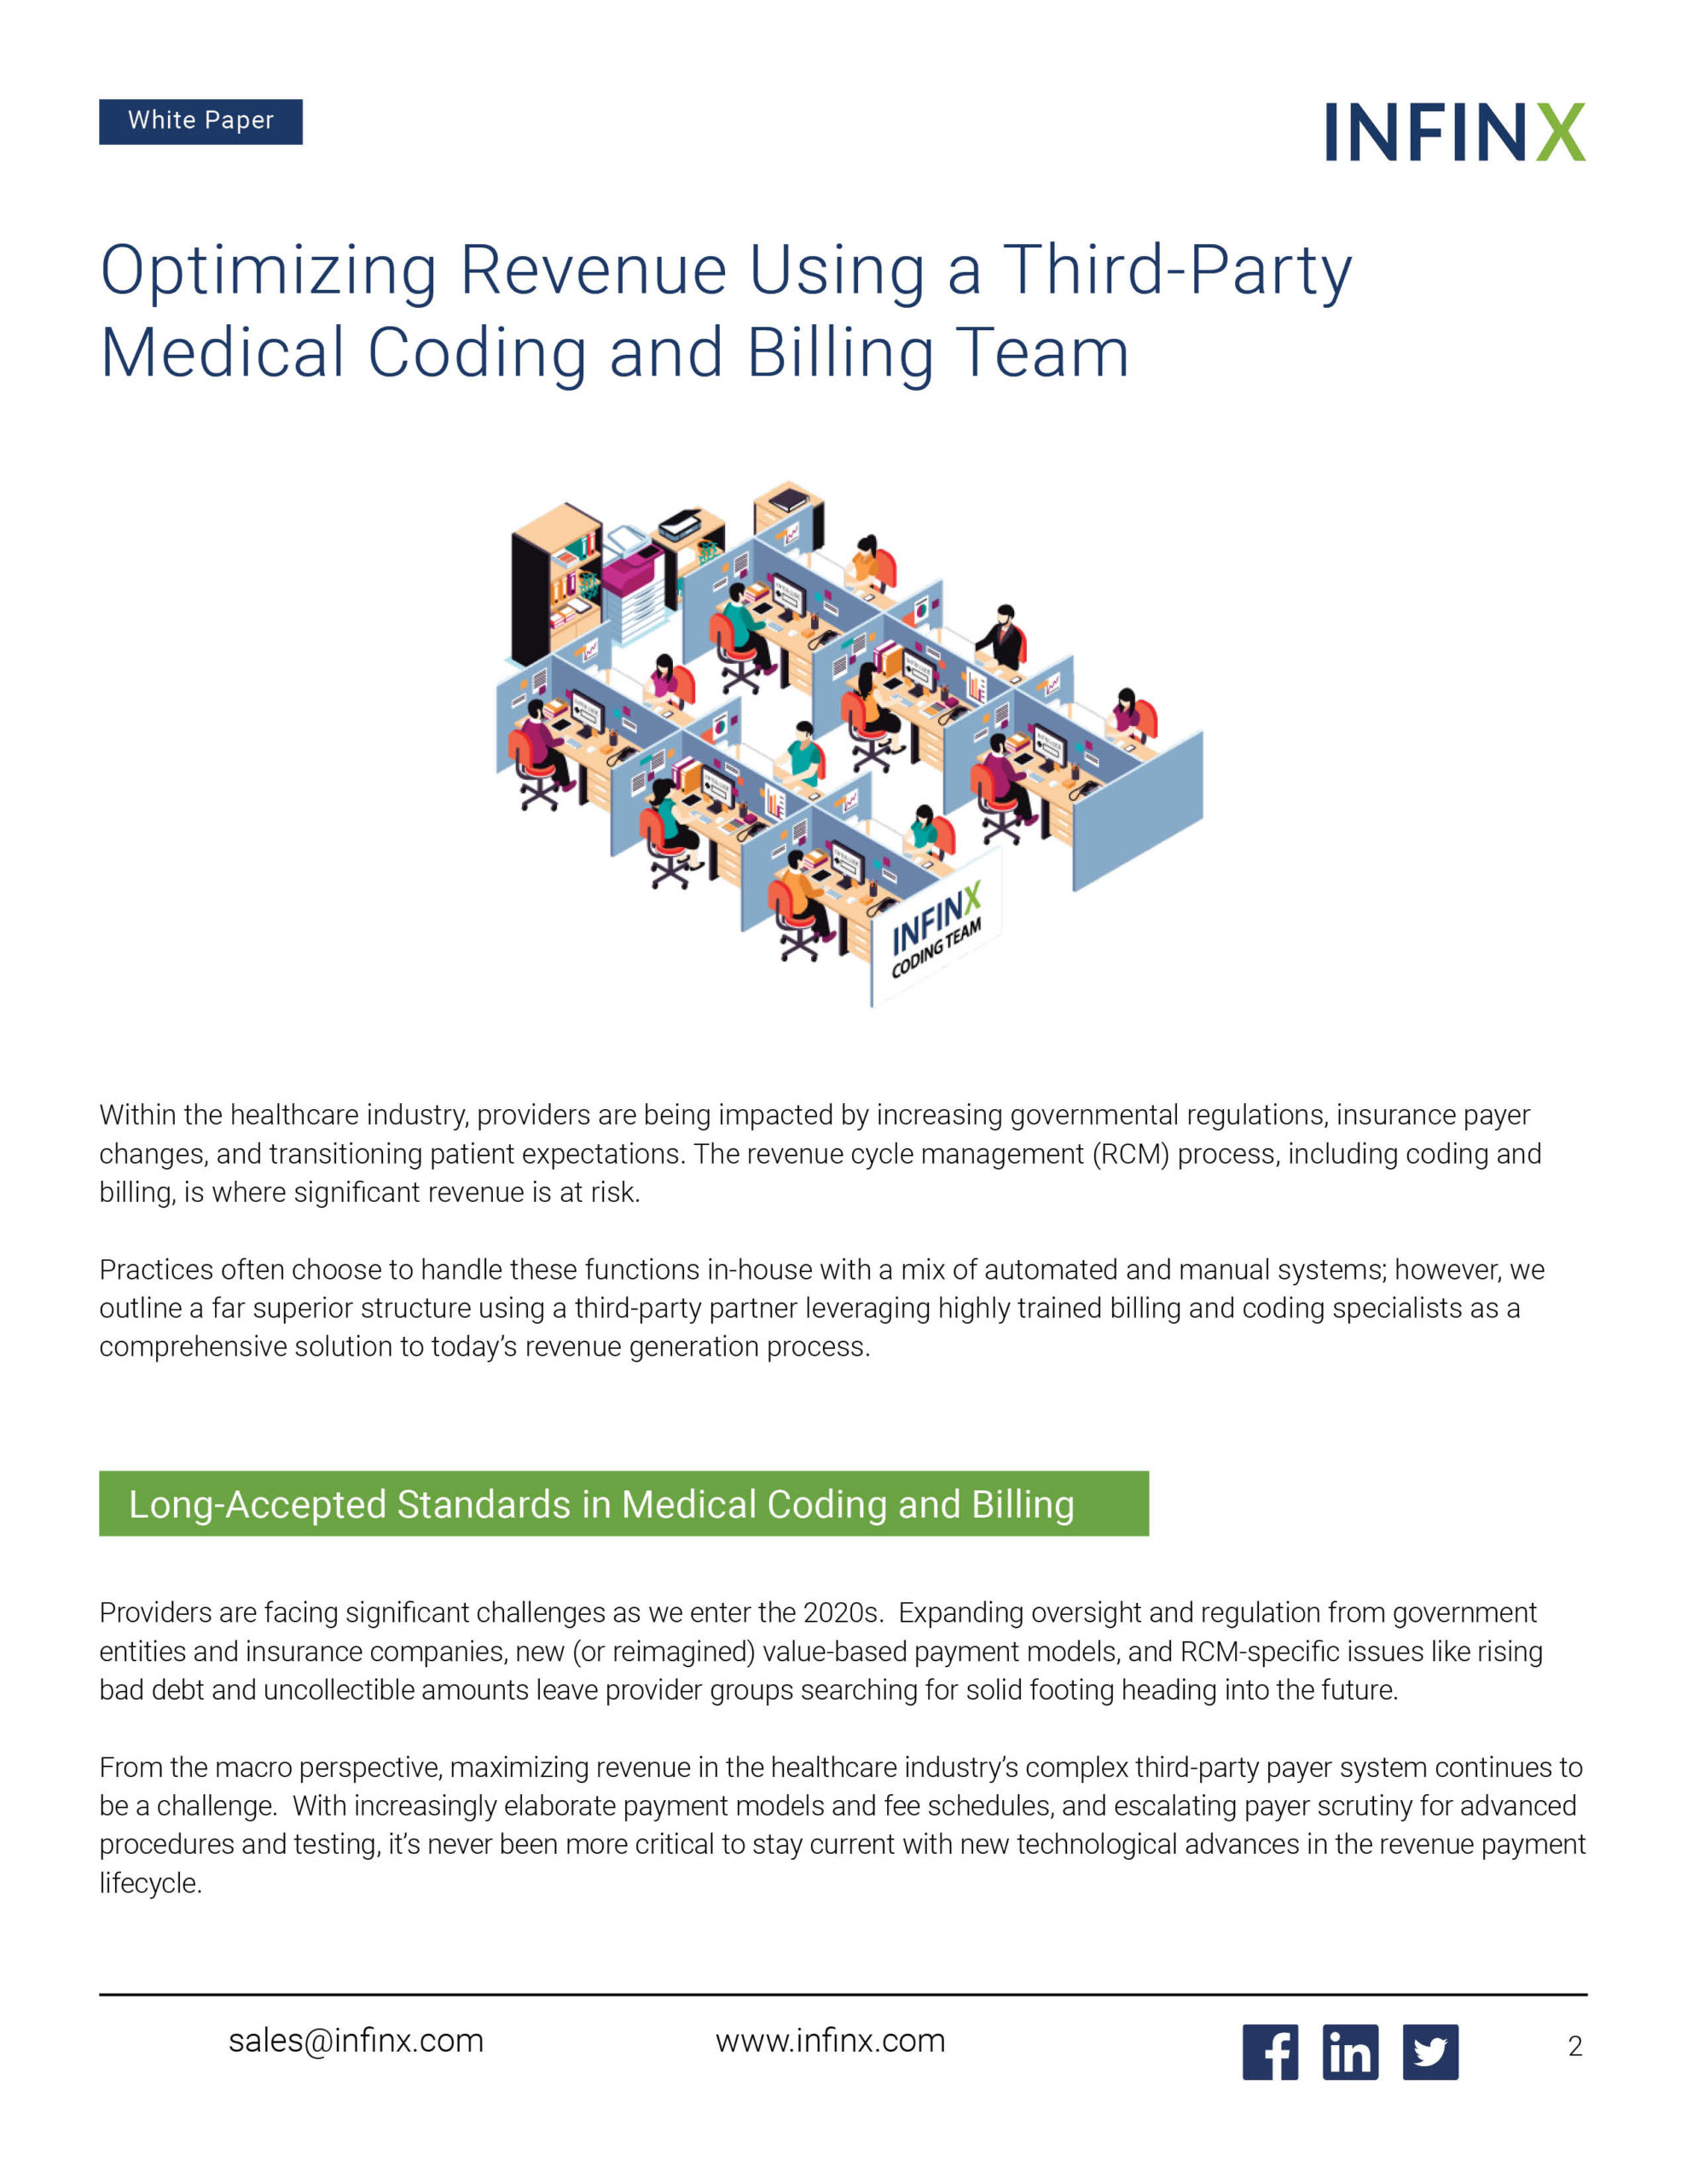 Infinx - White Paper - Optimizing Revenue using a Third-Party Medical Coding and Billing Team June2021 2